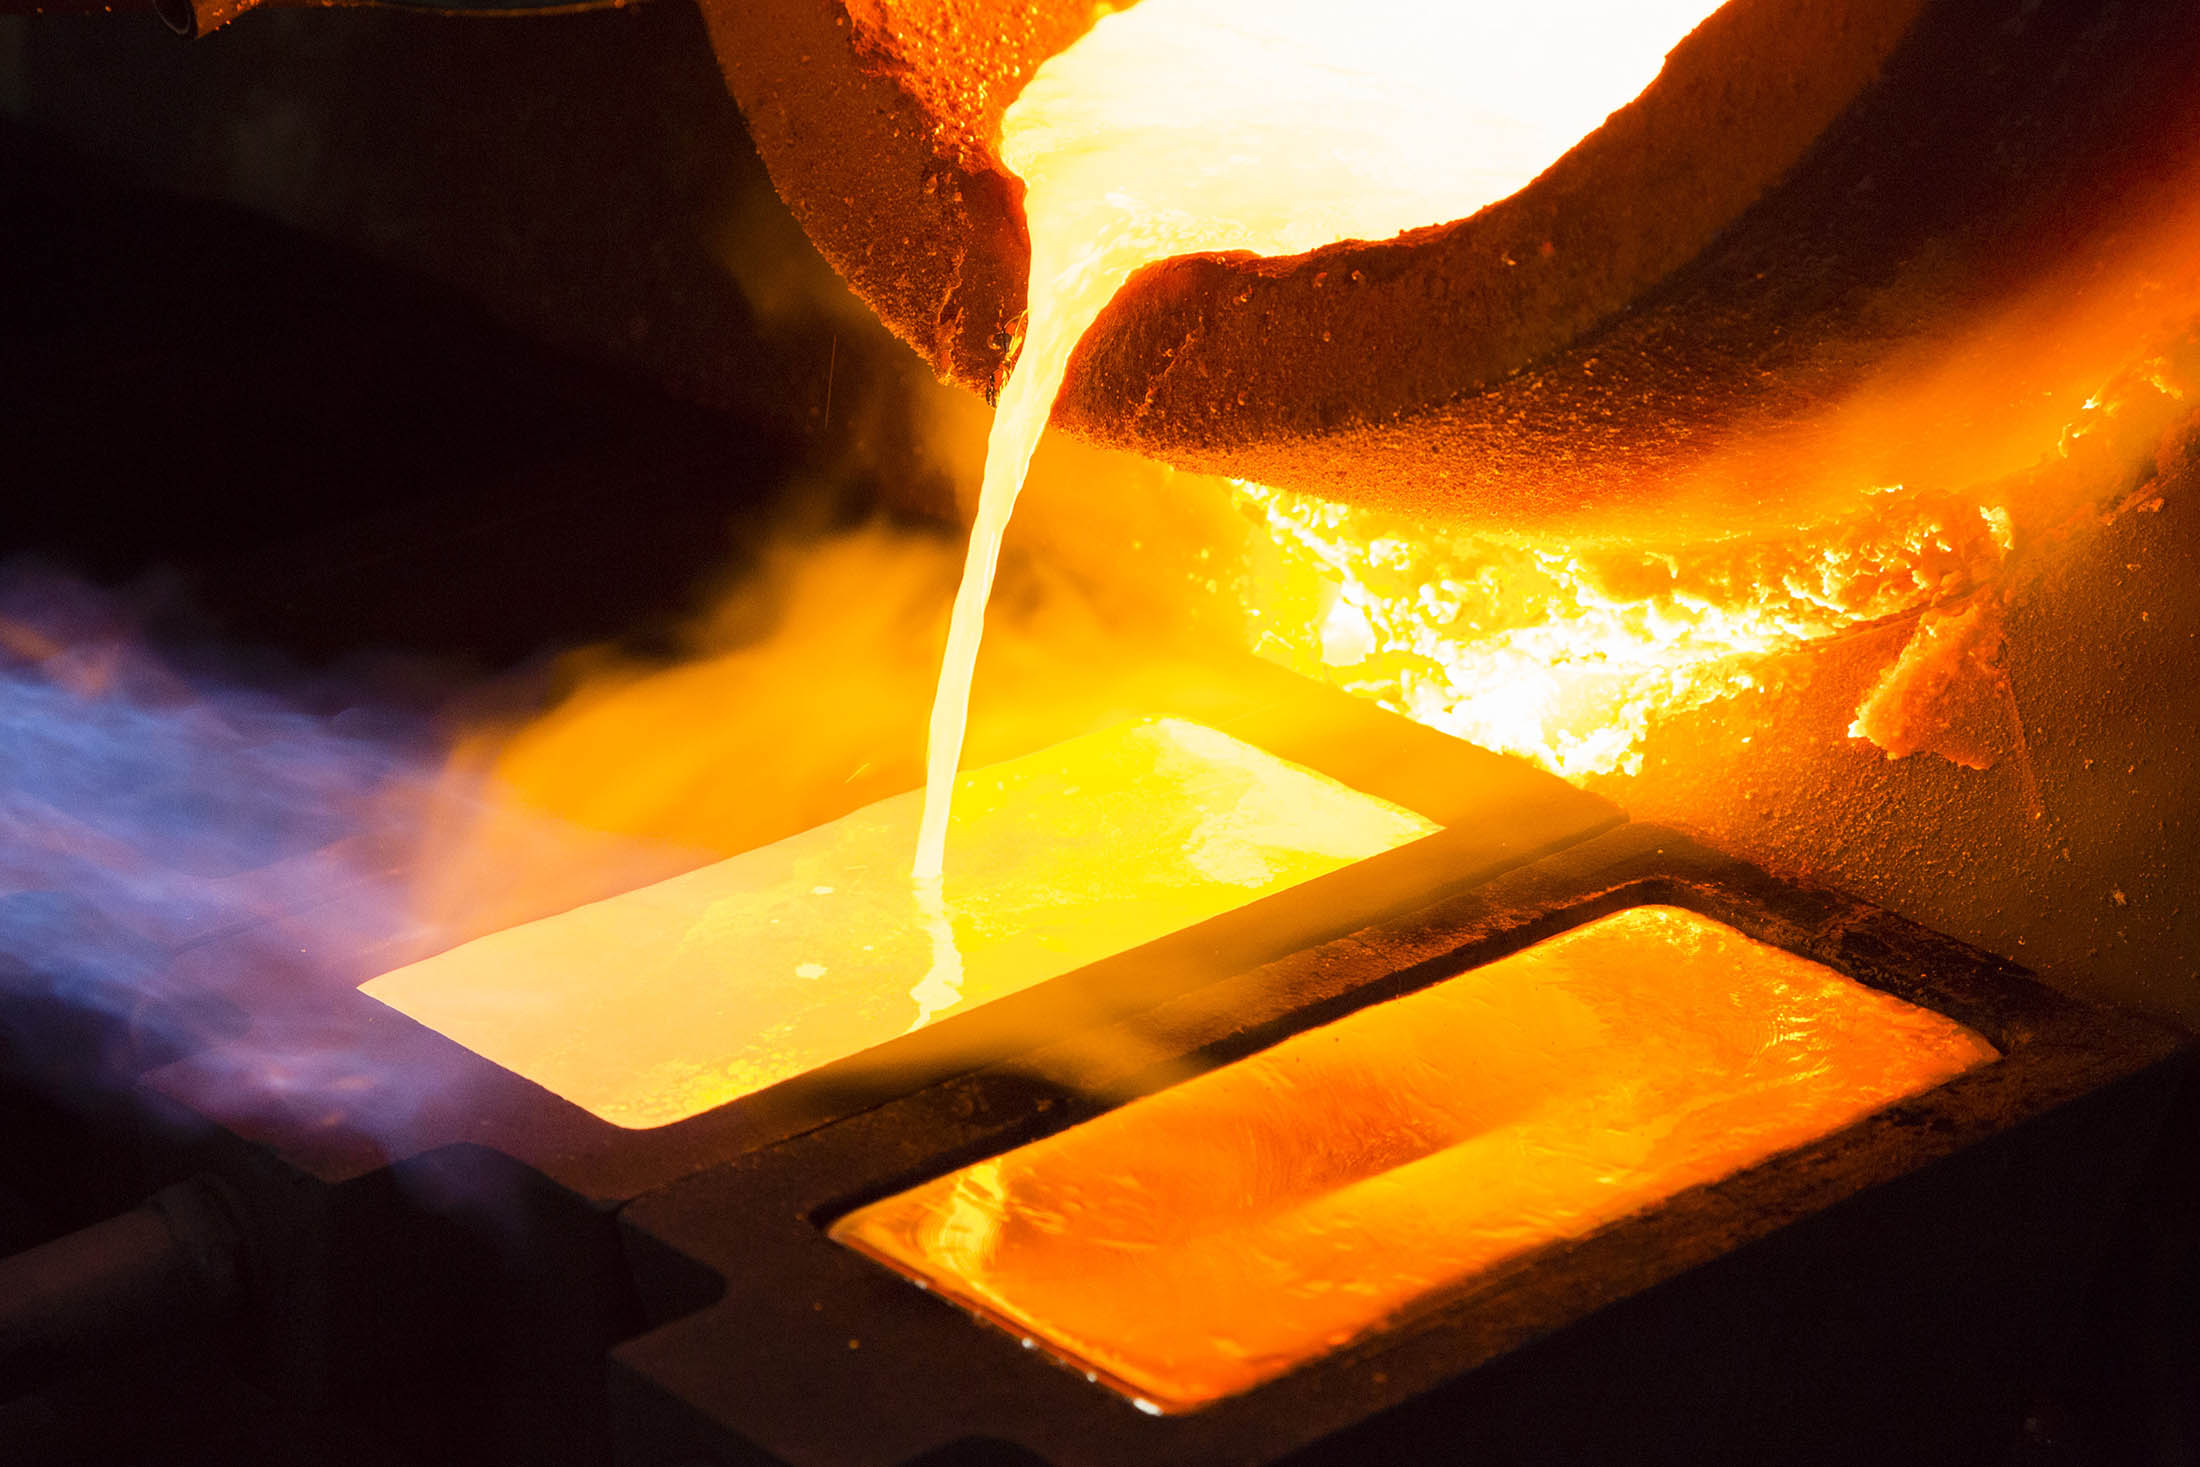 Molten gold pours from a crucible into a heated mould after refining.
